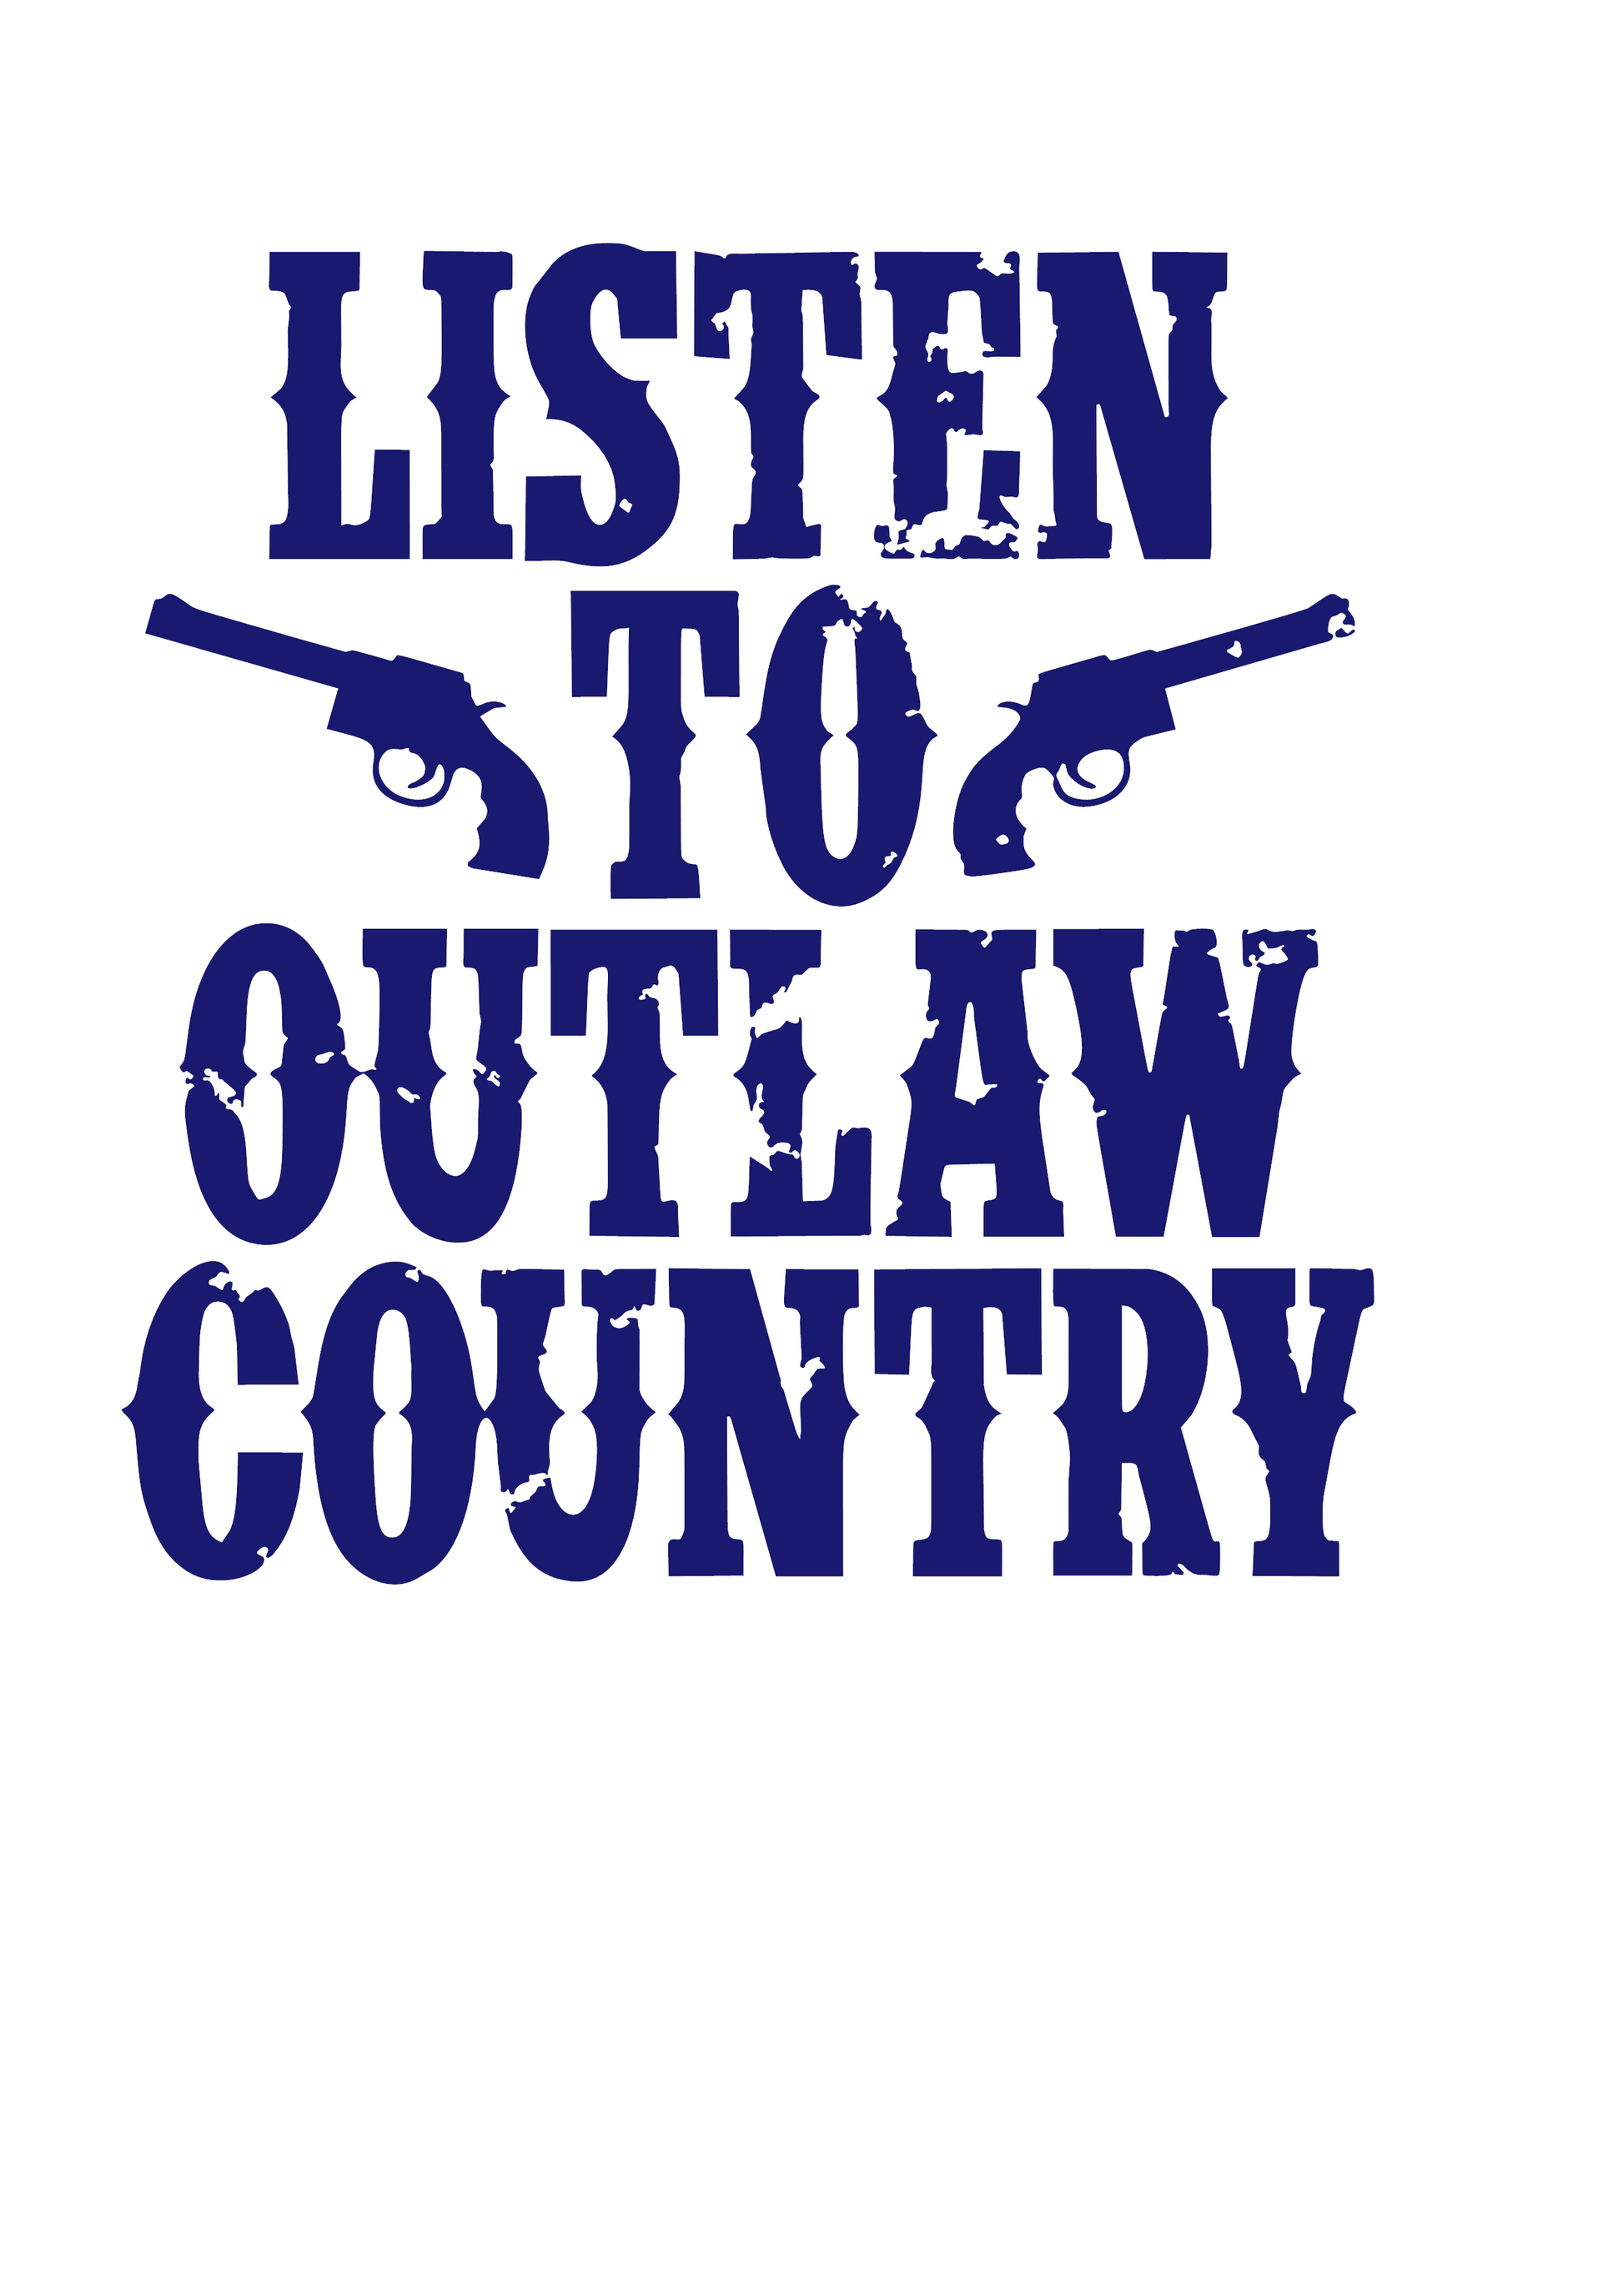 Outlaw Country Music Tshirt